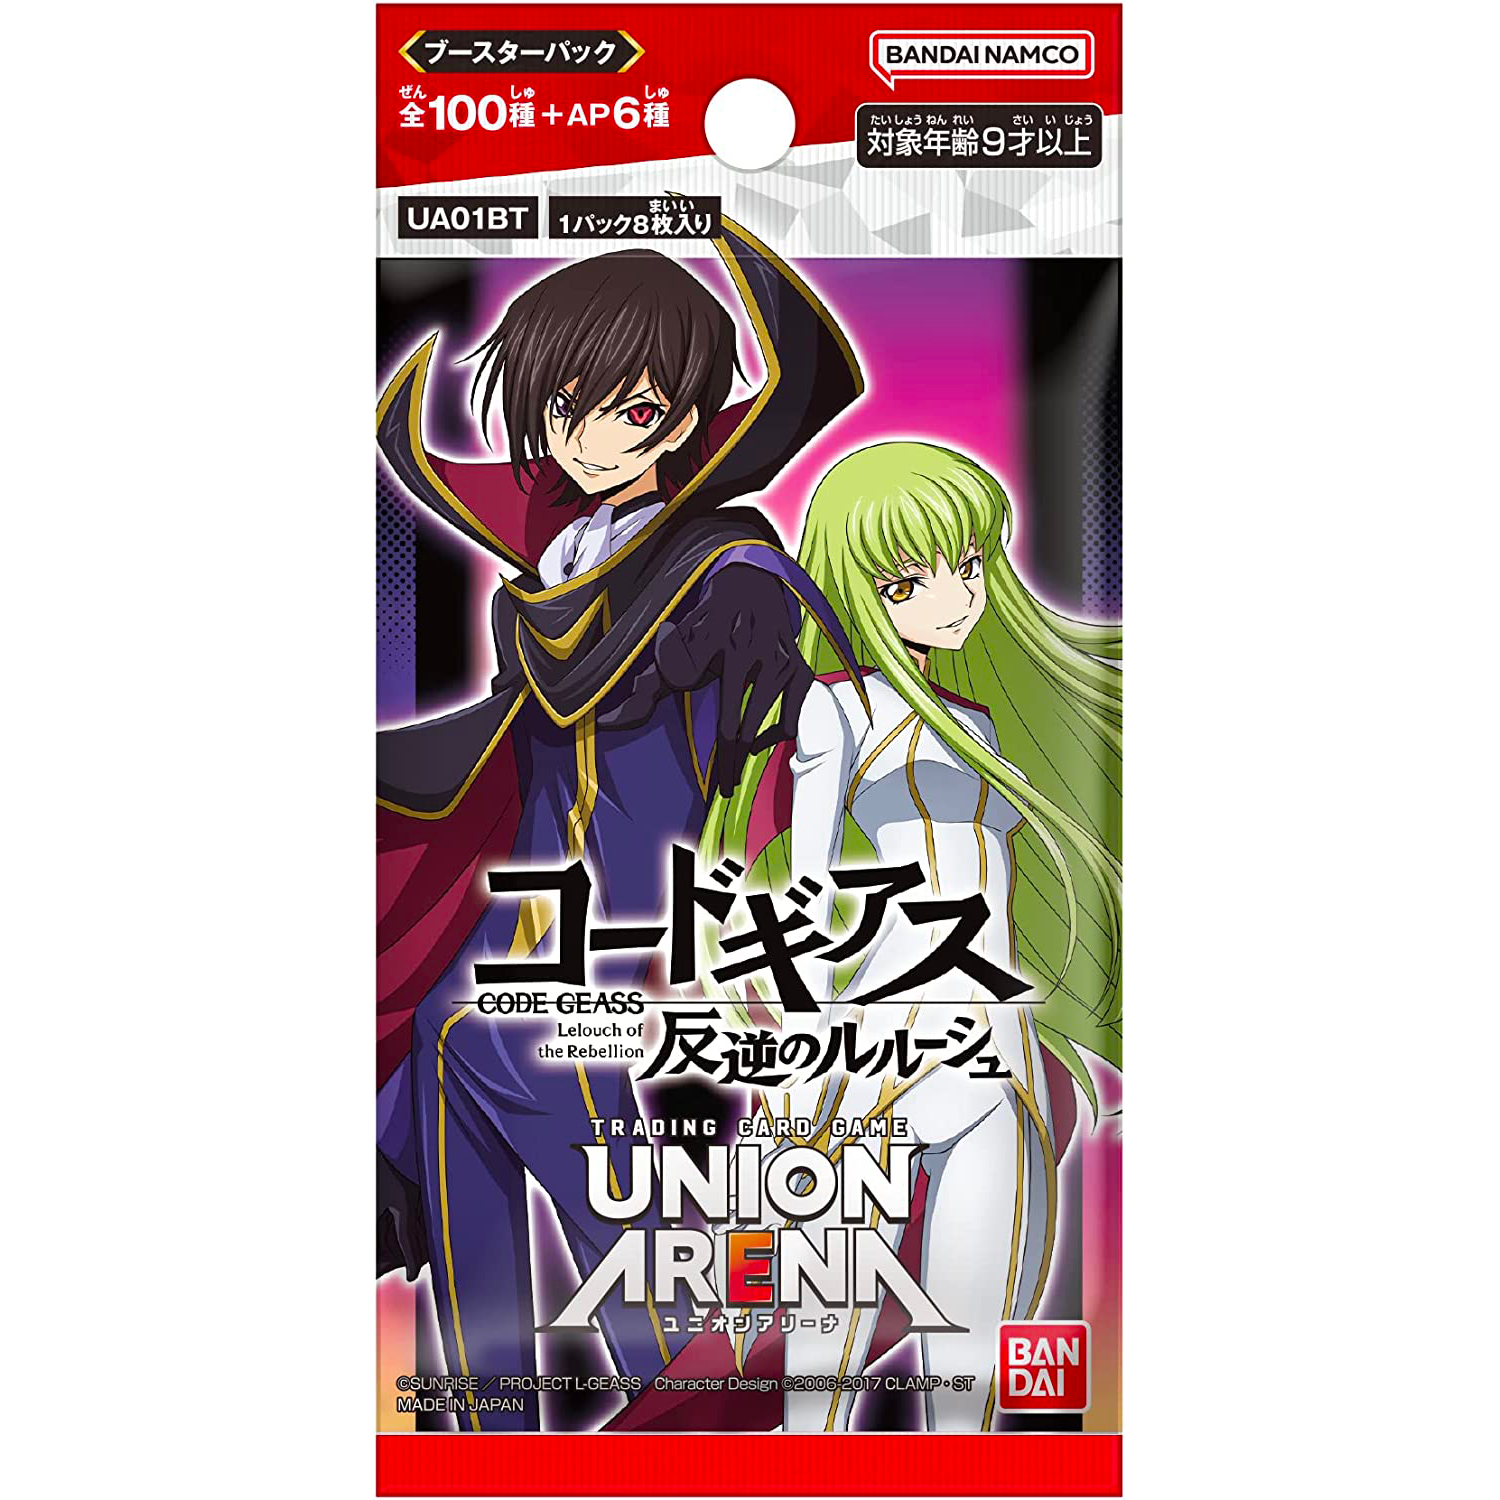 TRADING CARD GAME UNION ARENA [UA01BT] CODE GEASS Lelouch of the Rebellion - Booster